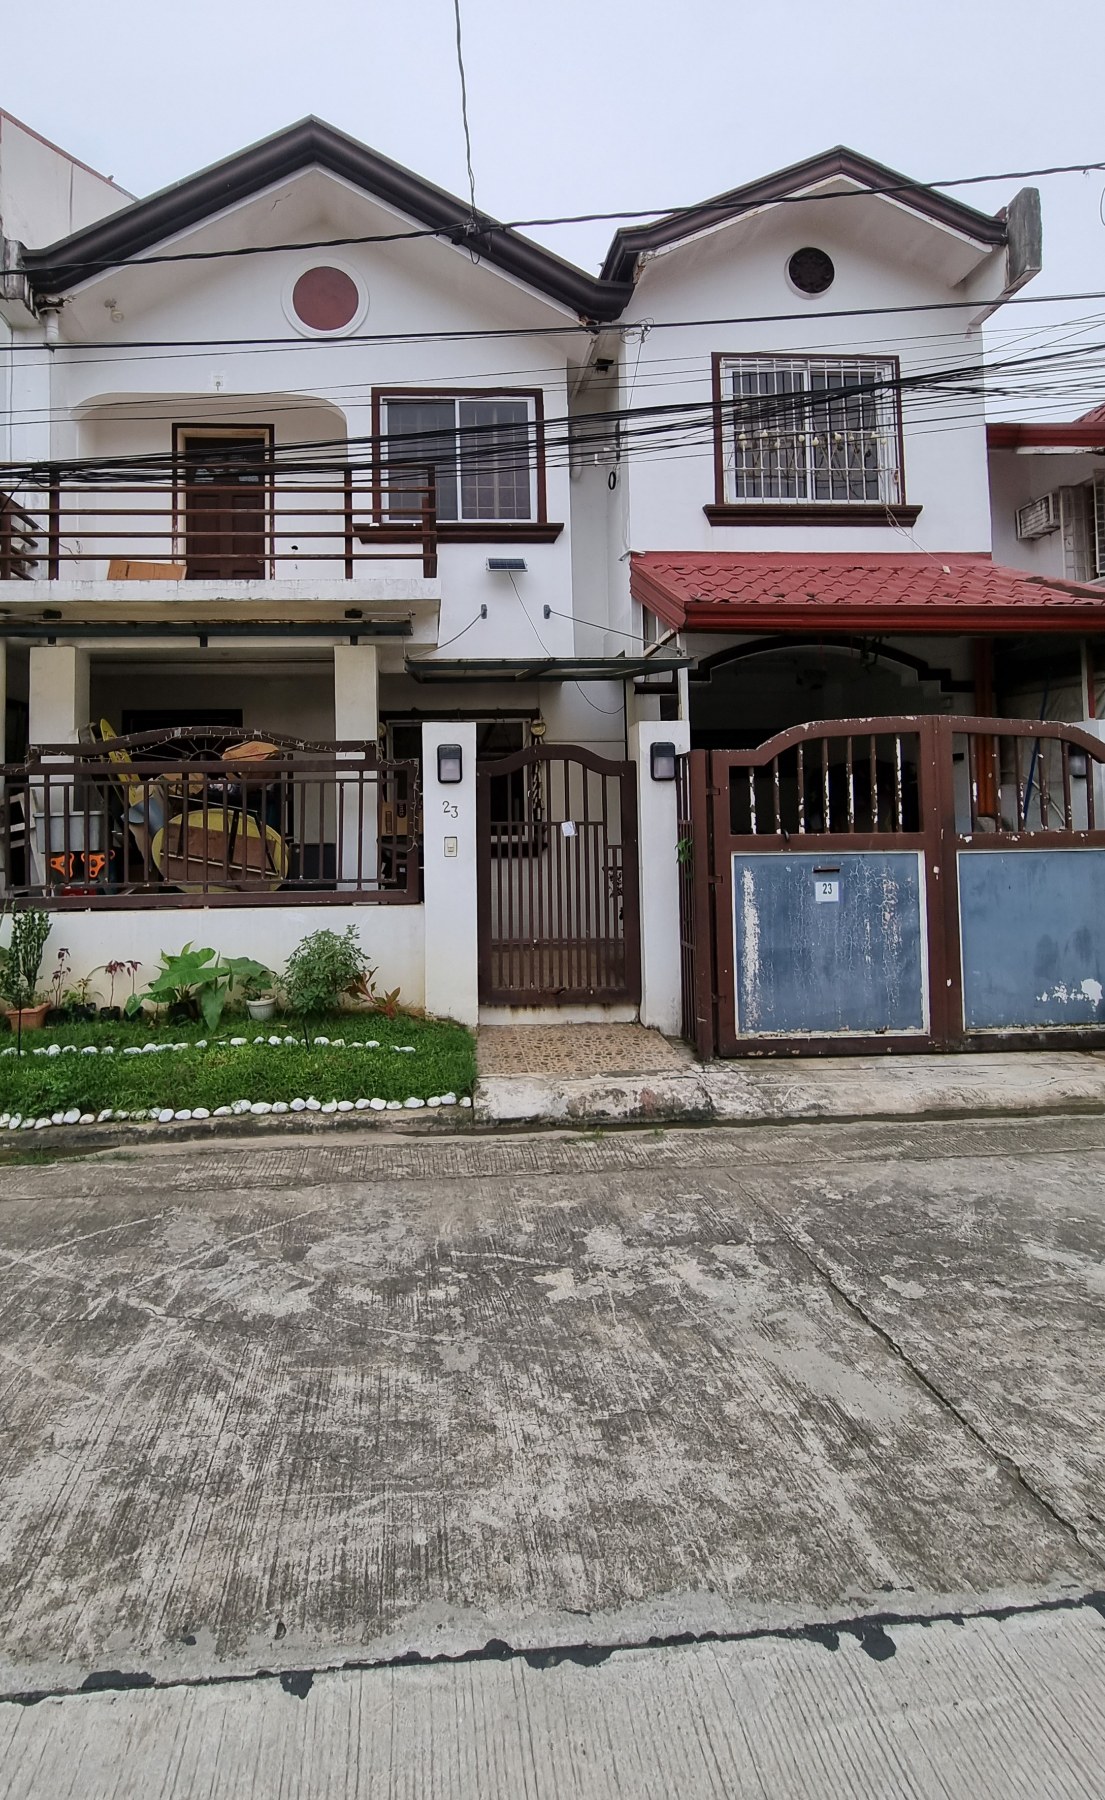 4 Bedroom House and Lot in Filinvest II Quezon City